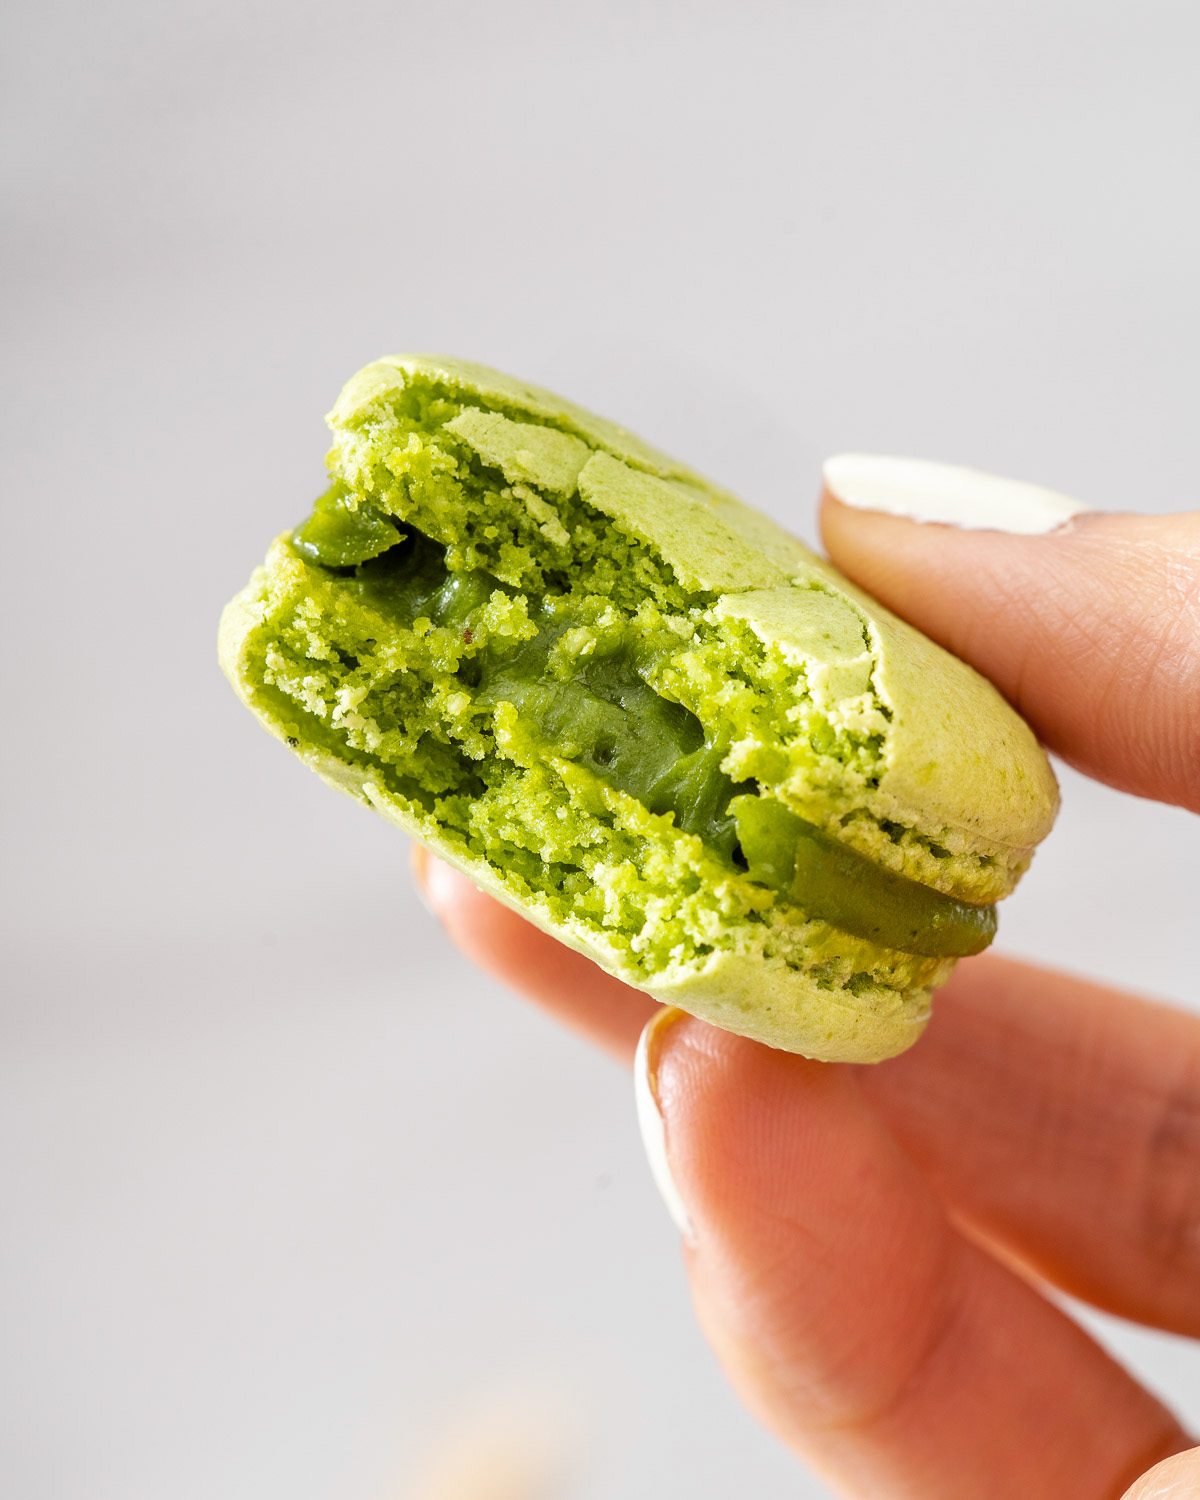 Holding a bitten matcha macaron up close to see the ganache filling.